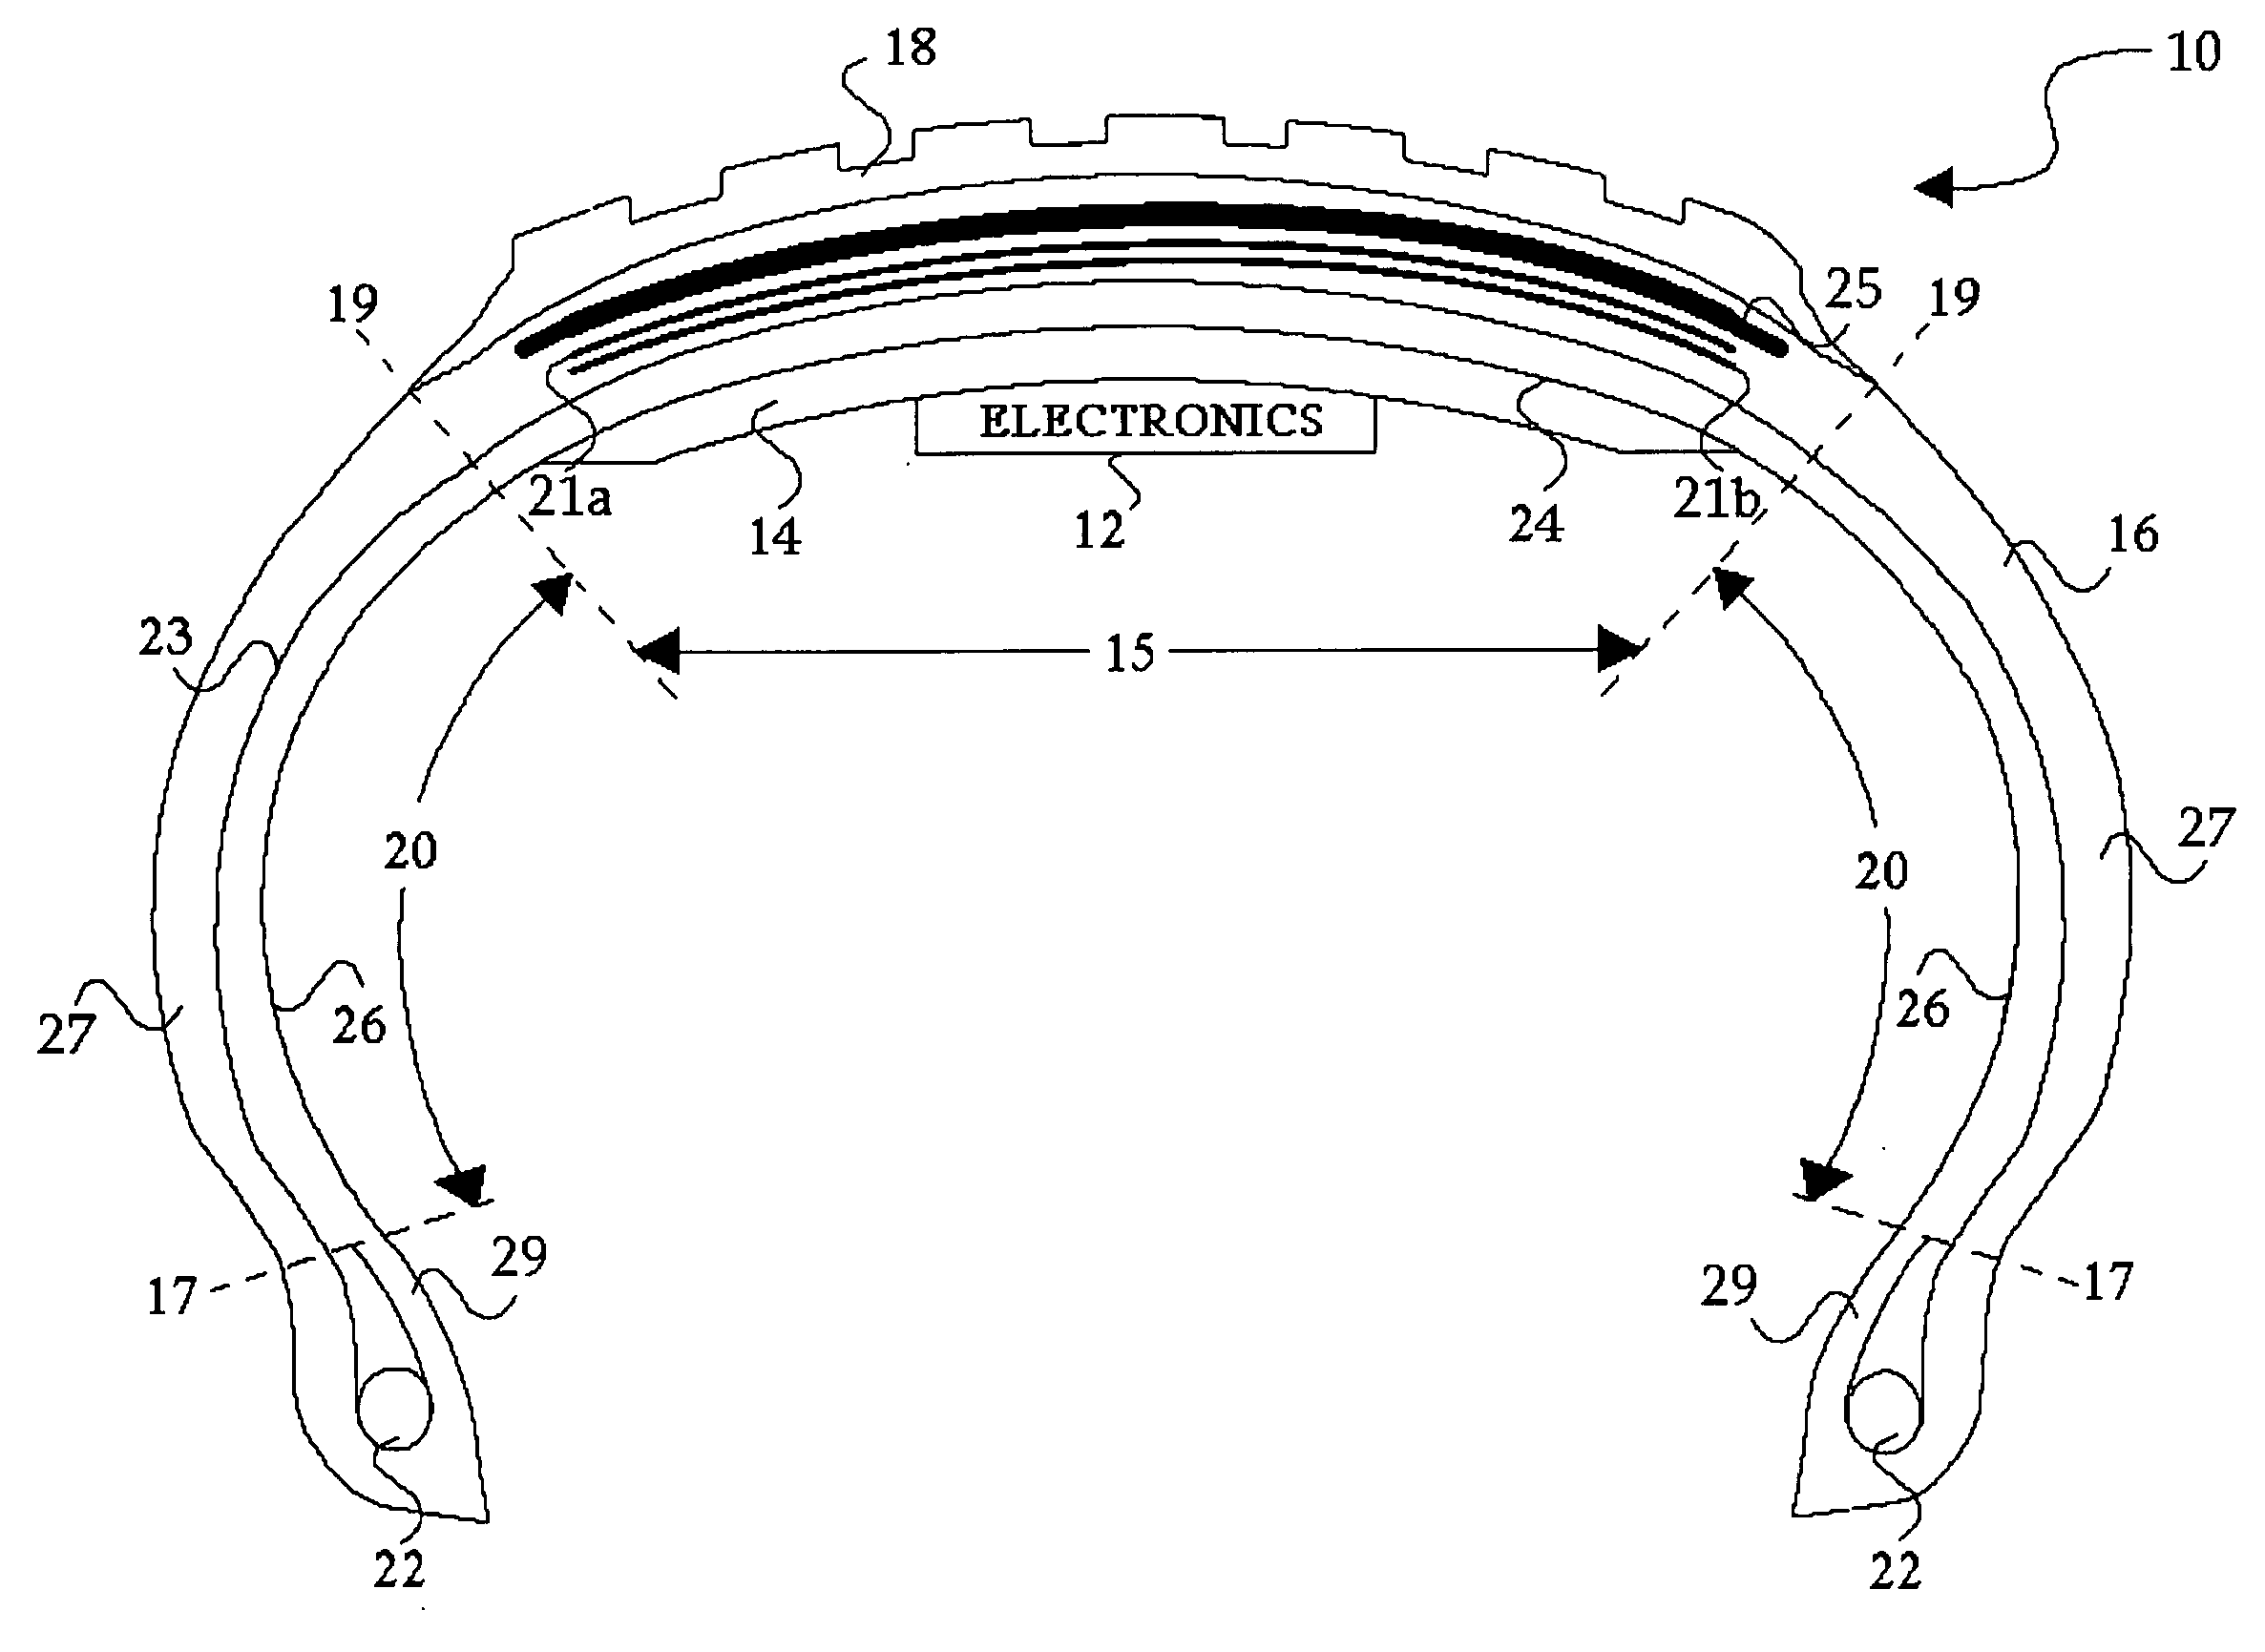 System and method for generating electric power from a rotating tire's mechanical energy